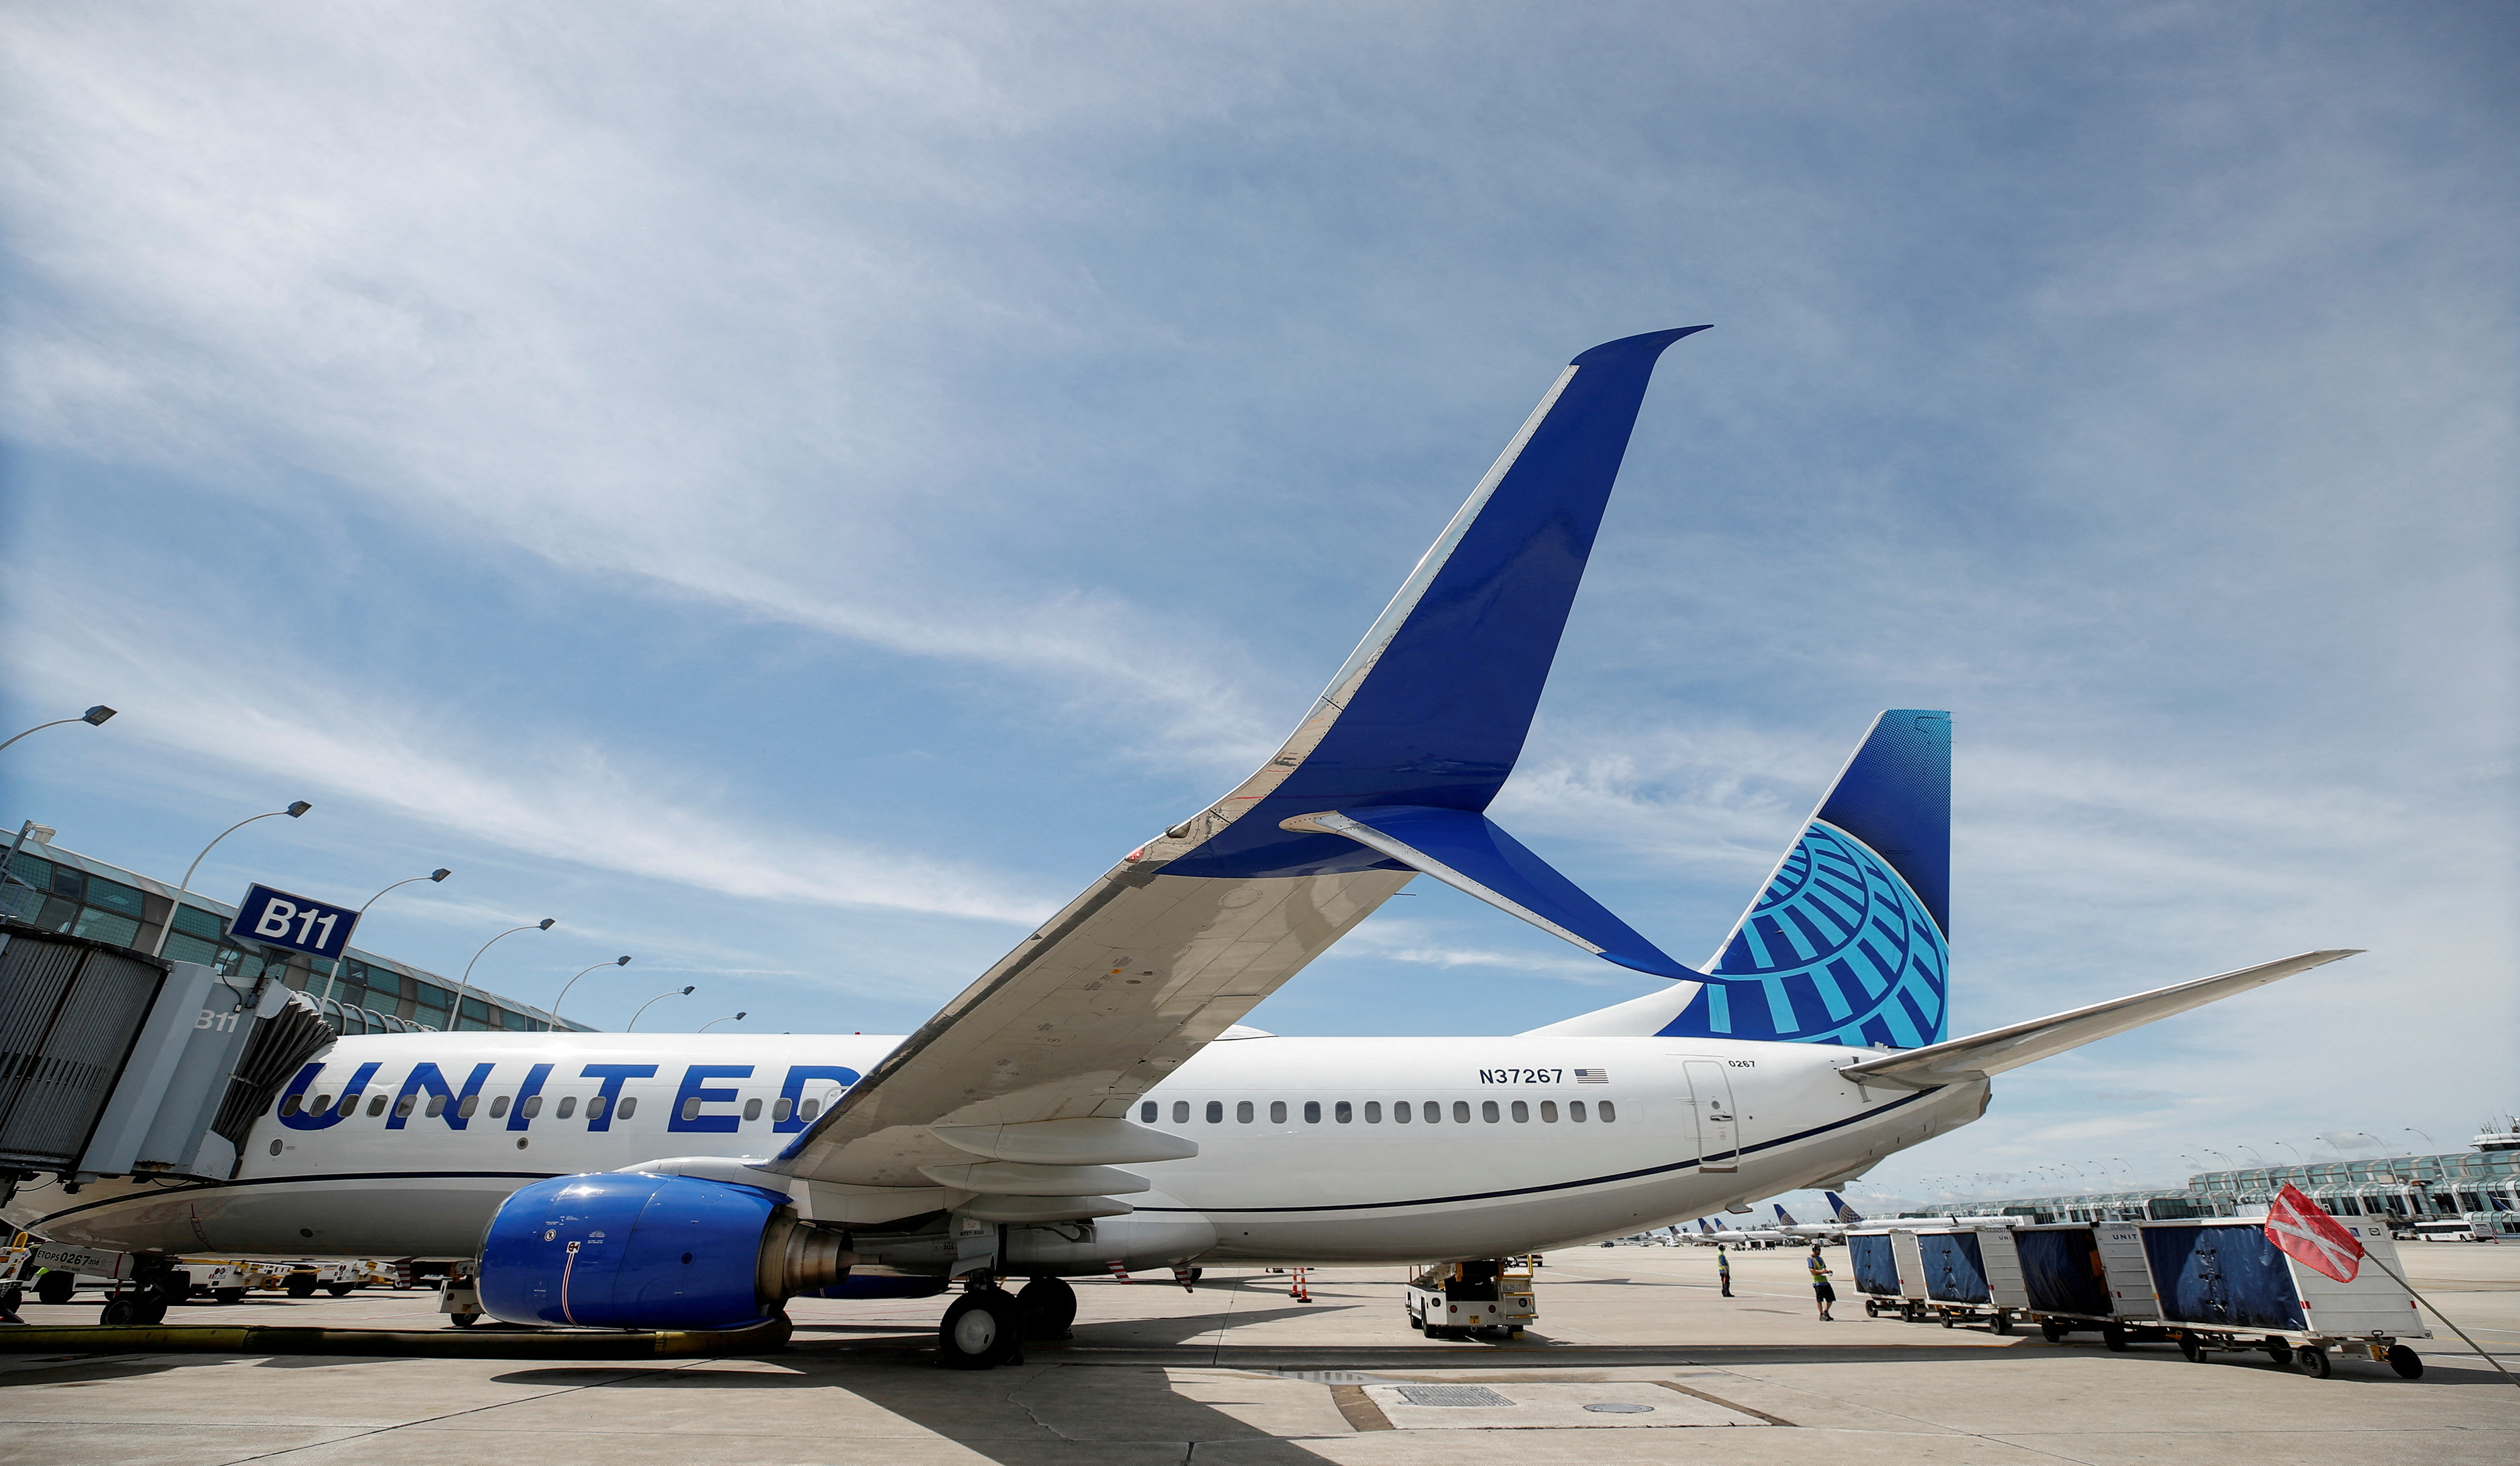 United Airlines first new livery Boeing 737-800 sits at a gate O'Hare International Airport in Chicago